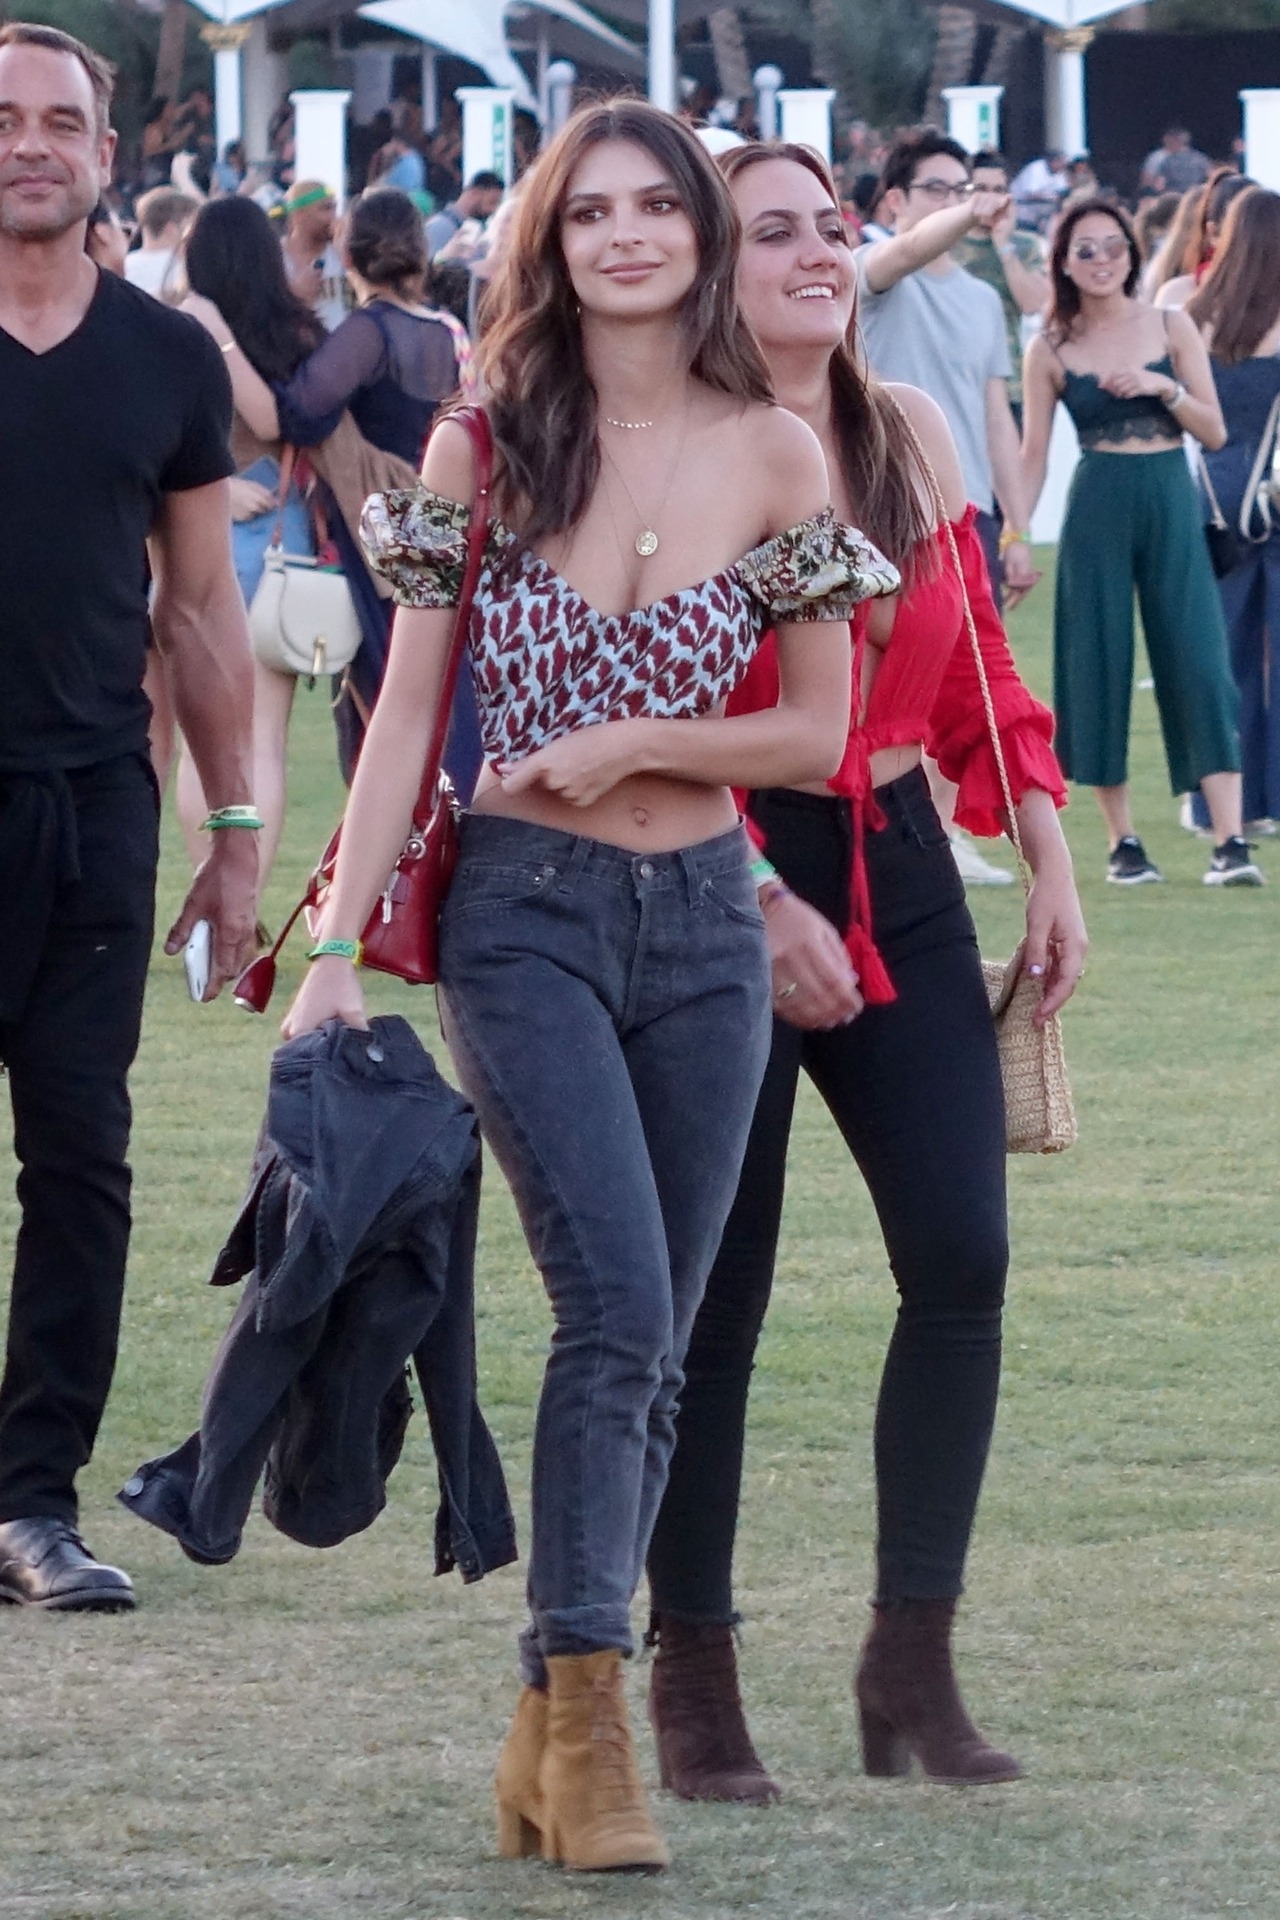 em-rata:    Emily Ratajkowski spotted out with friends at Coachella in Indio, CA